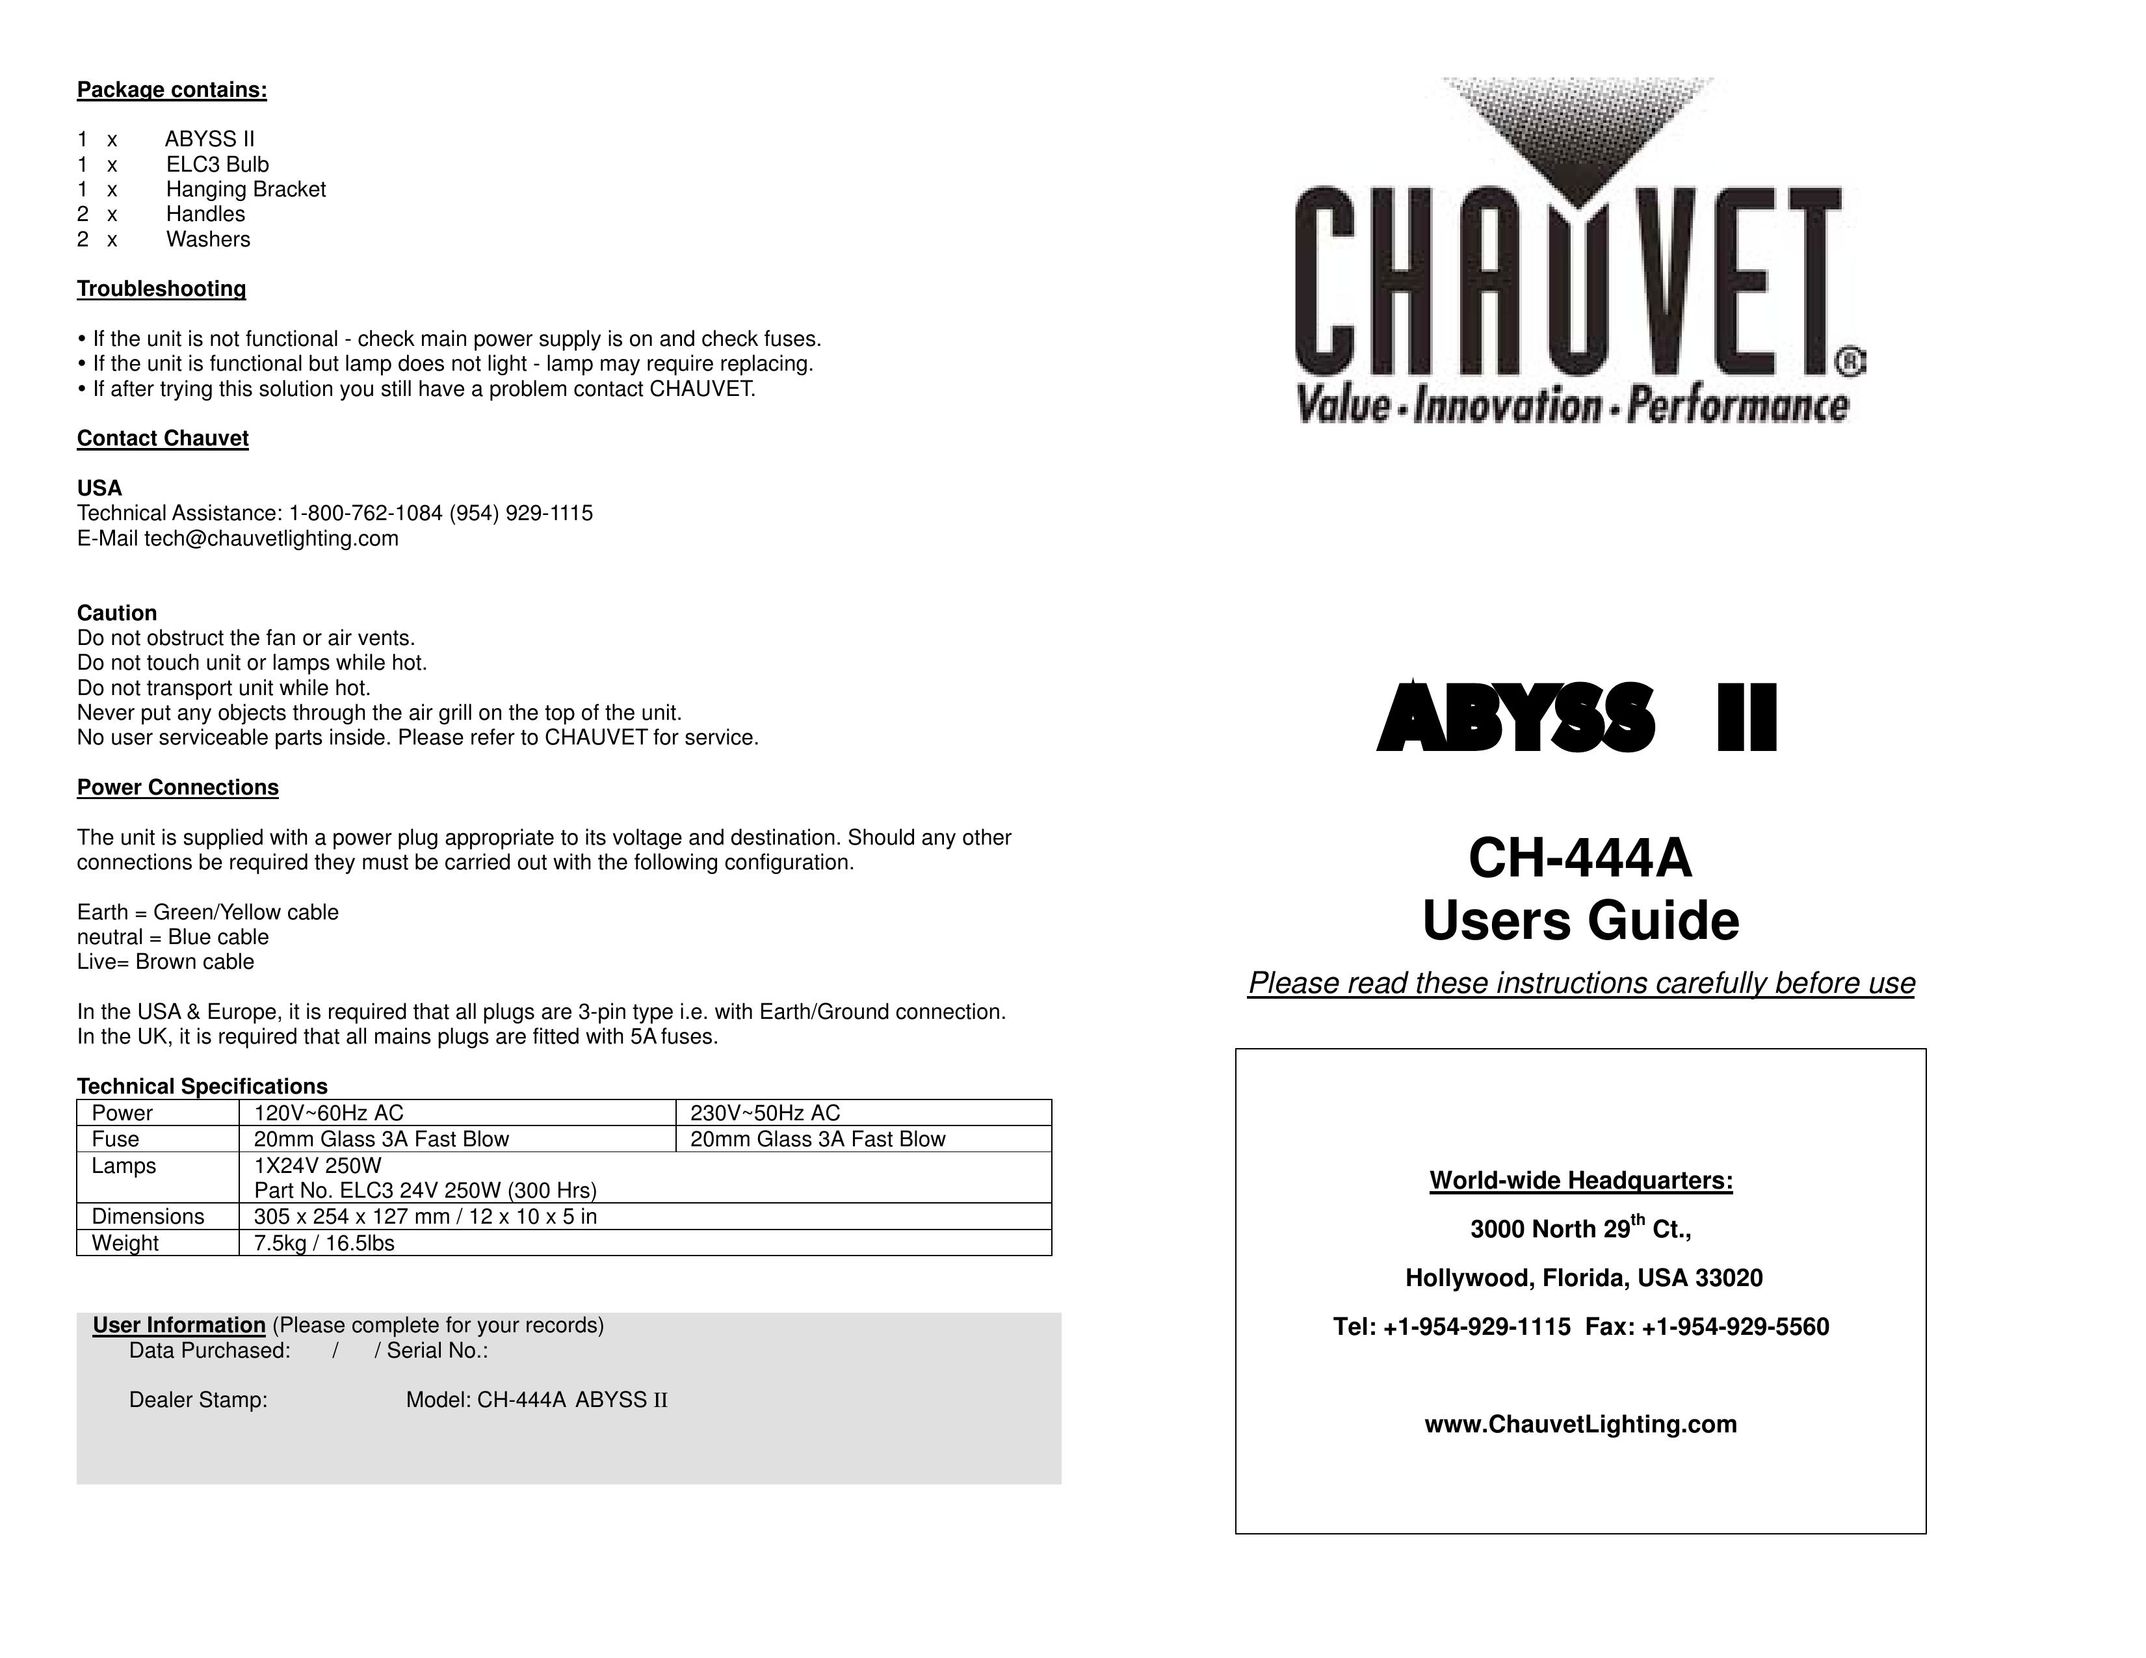 Chauvet CH-444A Indoor Furnishings User Manual